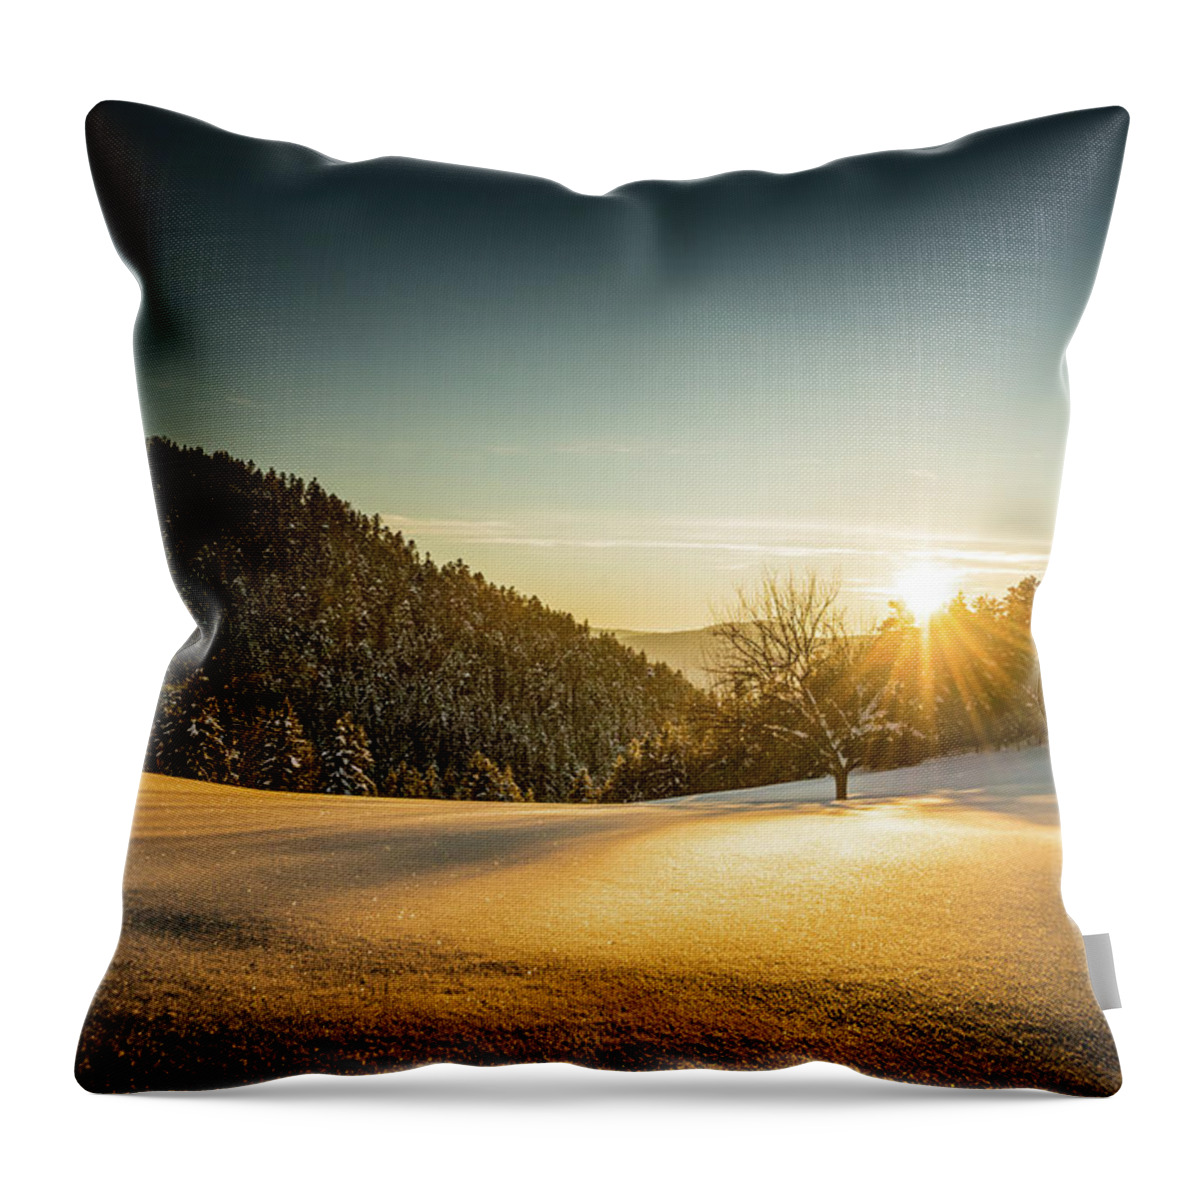 Scenics Throw Pillow featuring the photograph Winter Landscape At Sunset by Mmac72